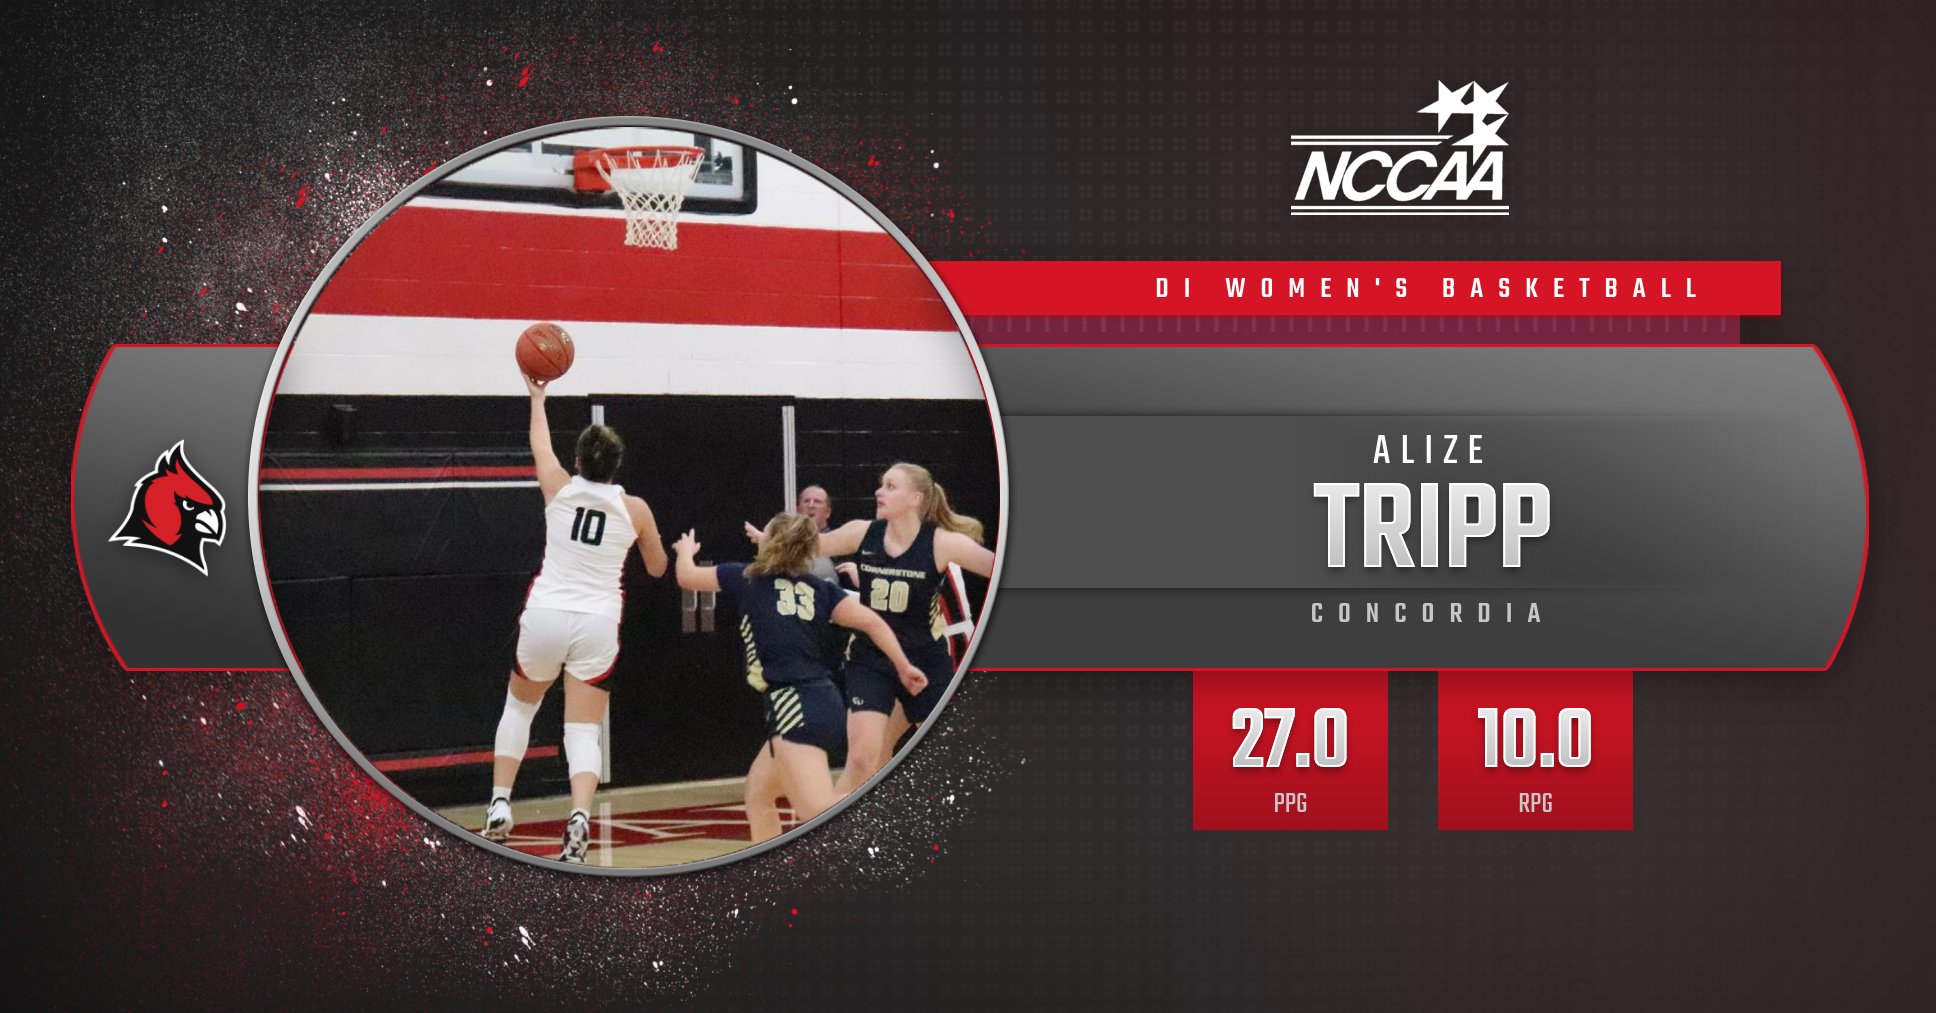 Tripp named NCCAA Student-Athlete of the Week